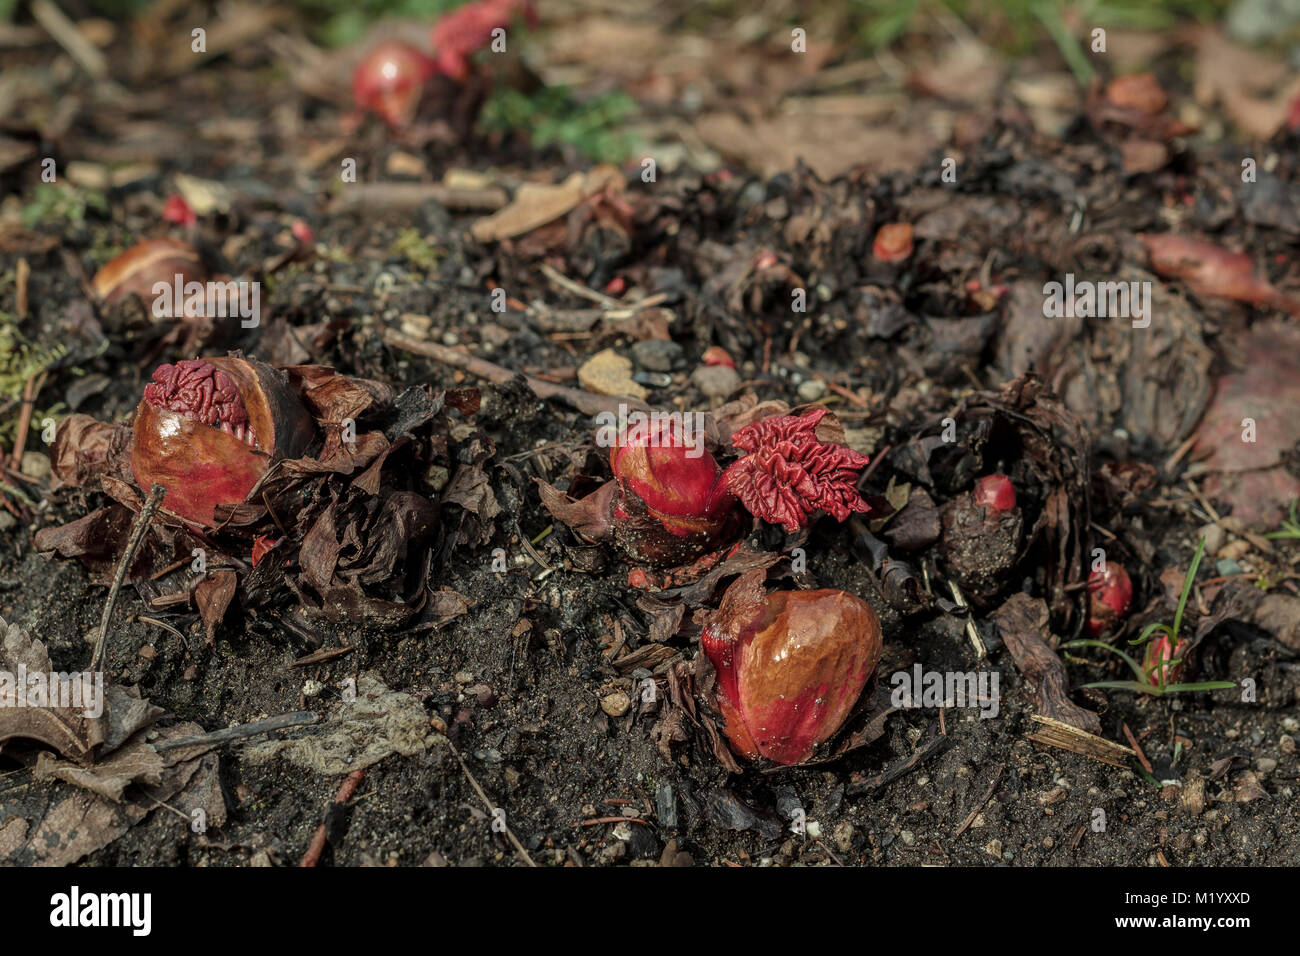 The earliest food crop in a backyard garden, rhubarb's fleshy red buds emerge from the soil in late winter, before any leaves are visible. Stock Photo